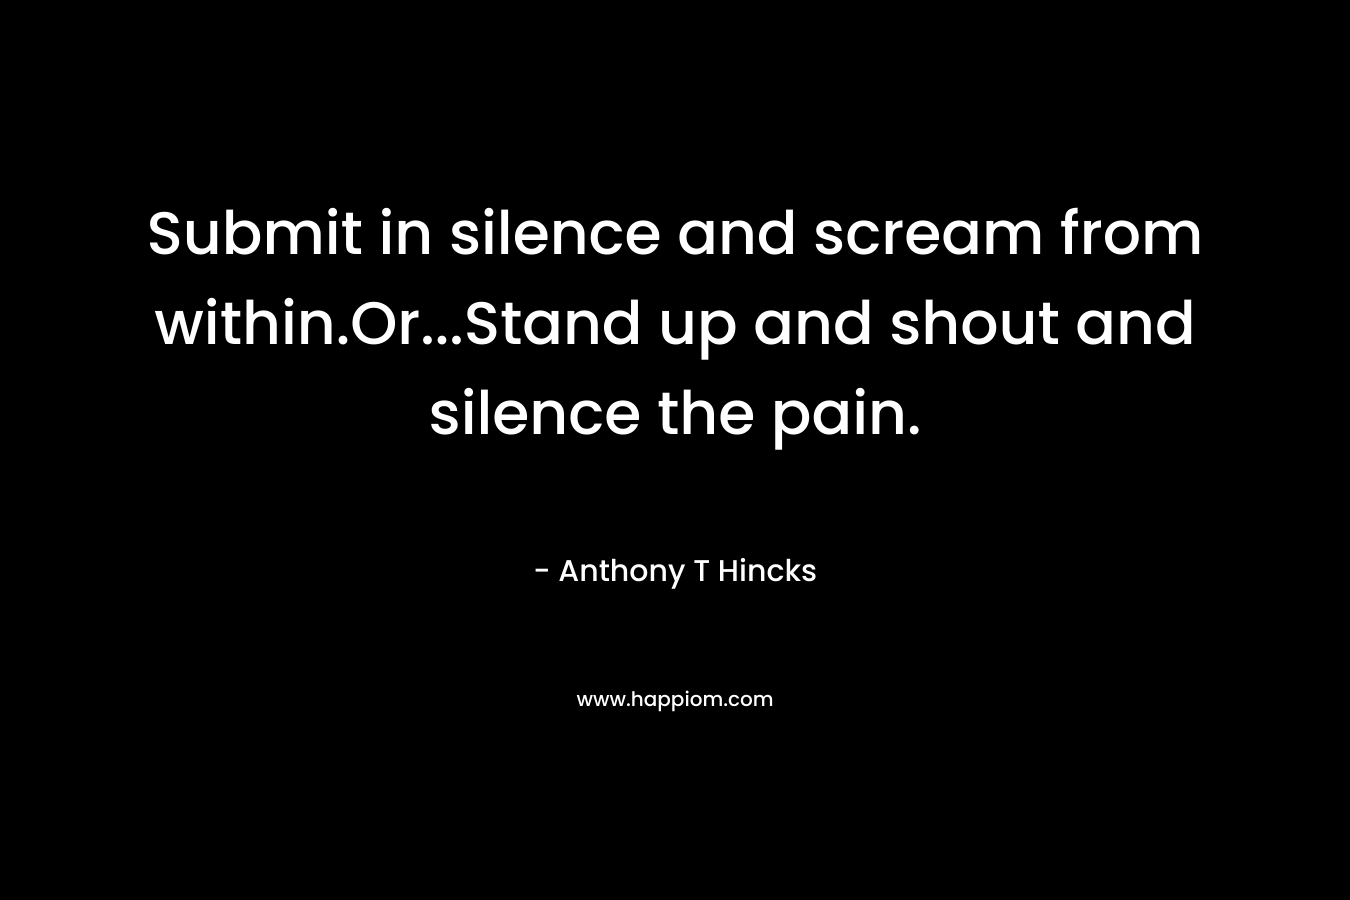 Submit in silence and scream from within.Or...Stand up and shout and silence the pain.